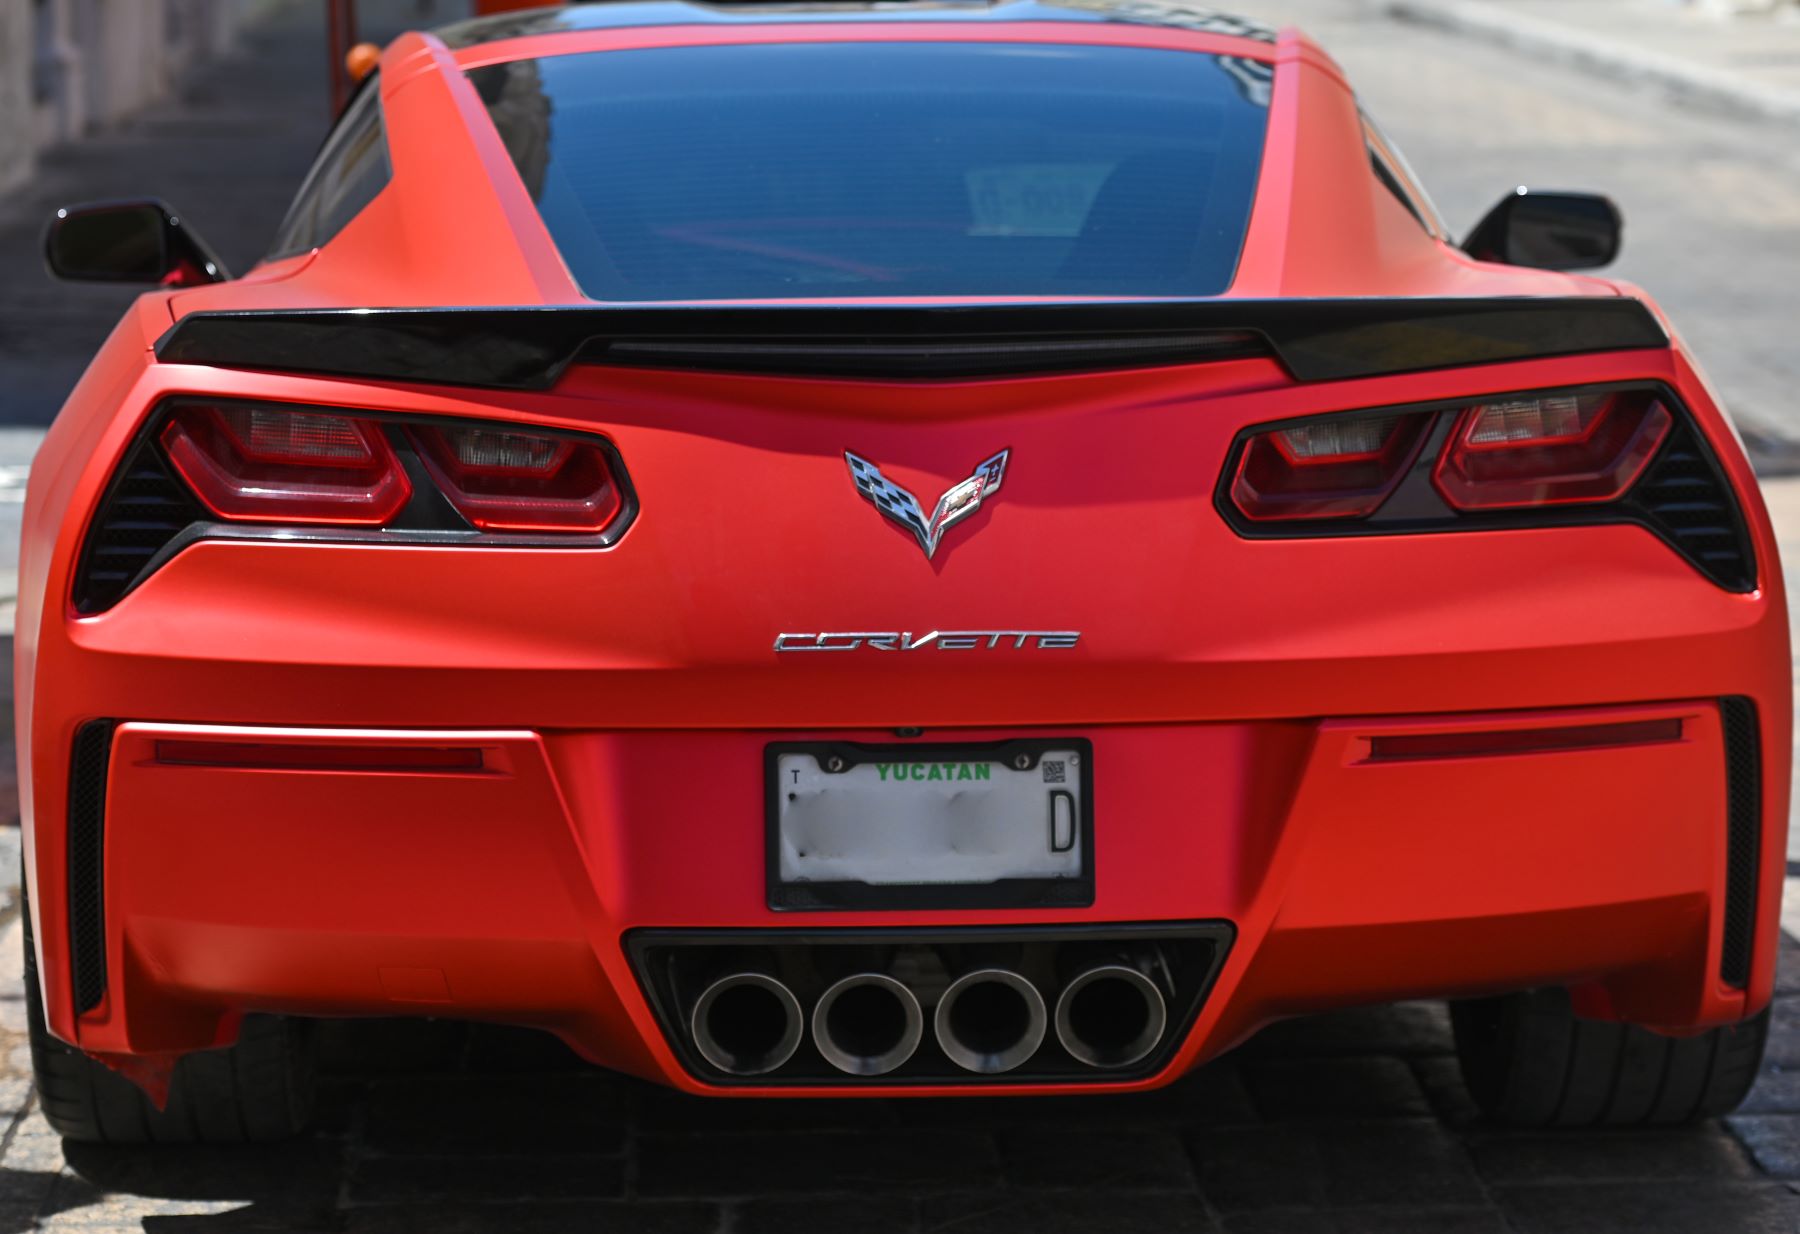 2022 Chevy Corvette luxury sports car rear end view of trunk taillights, and exhaust seen in Campeche, Mexico